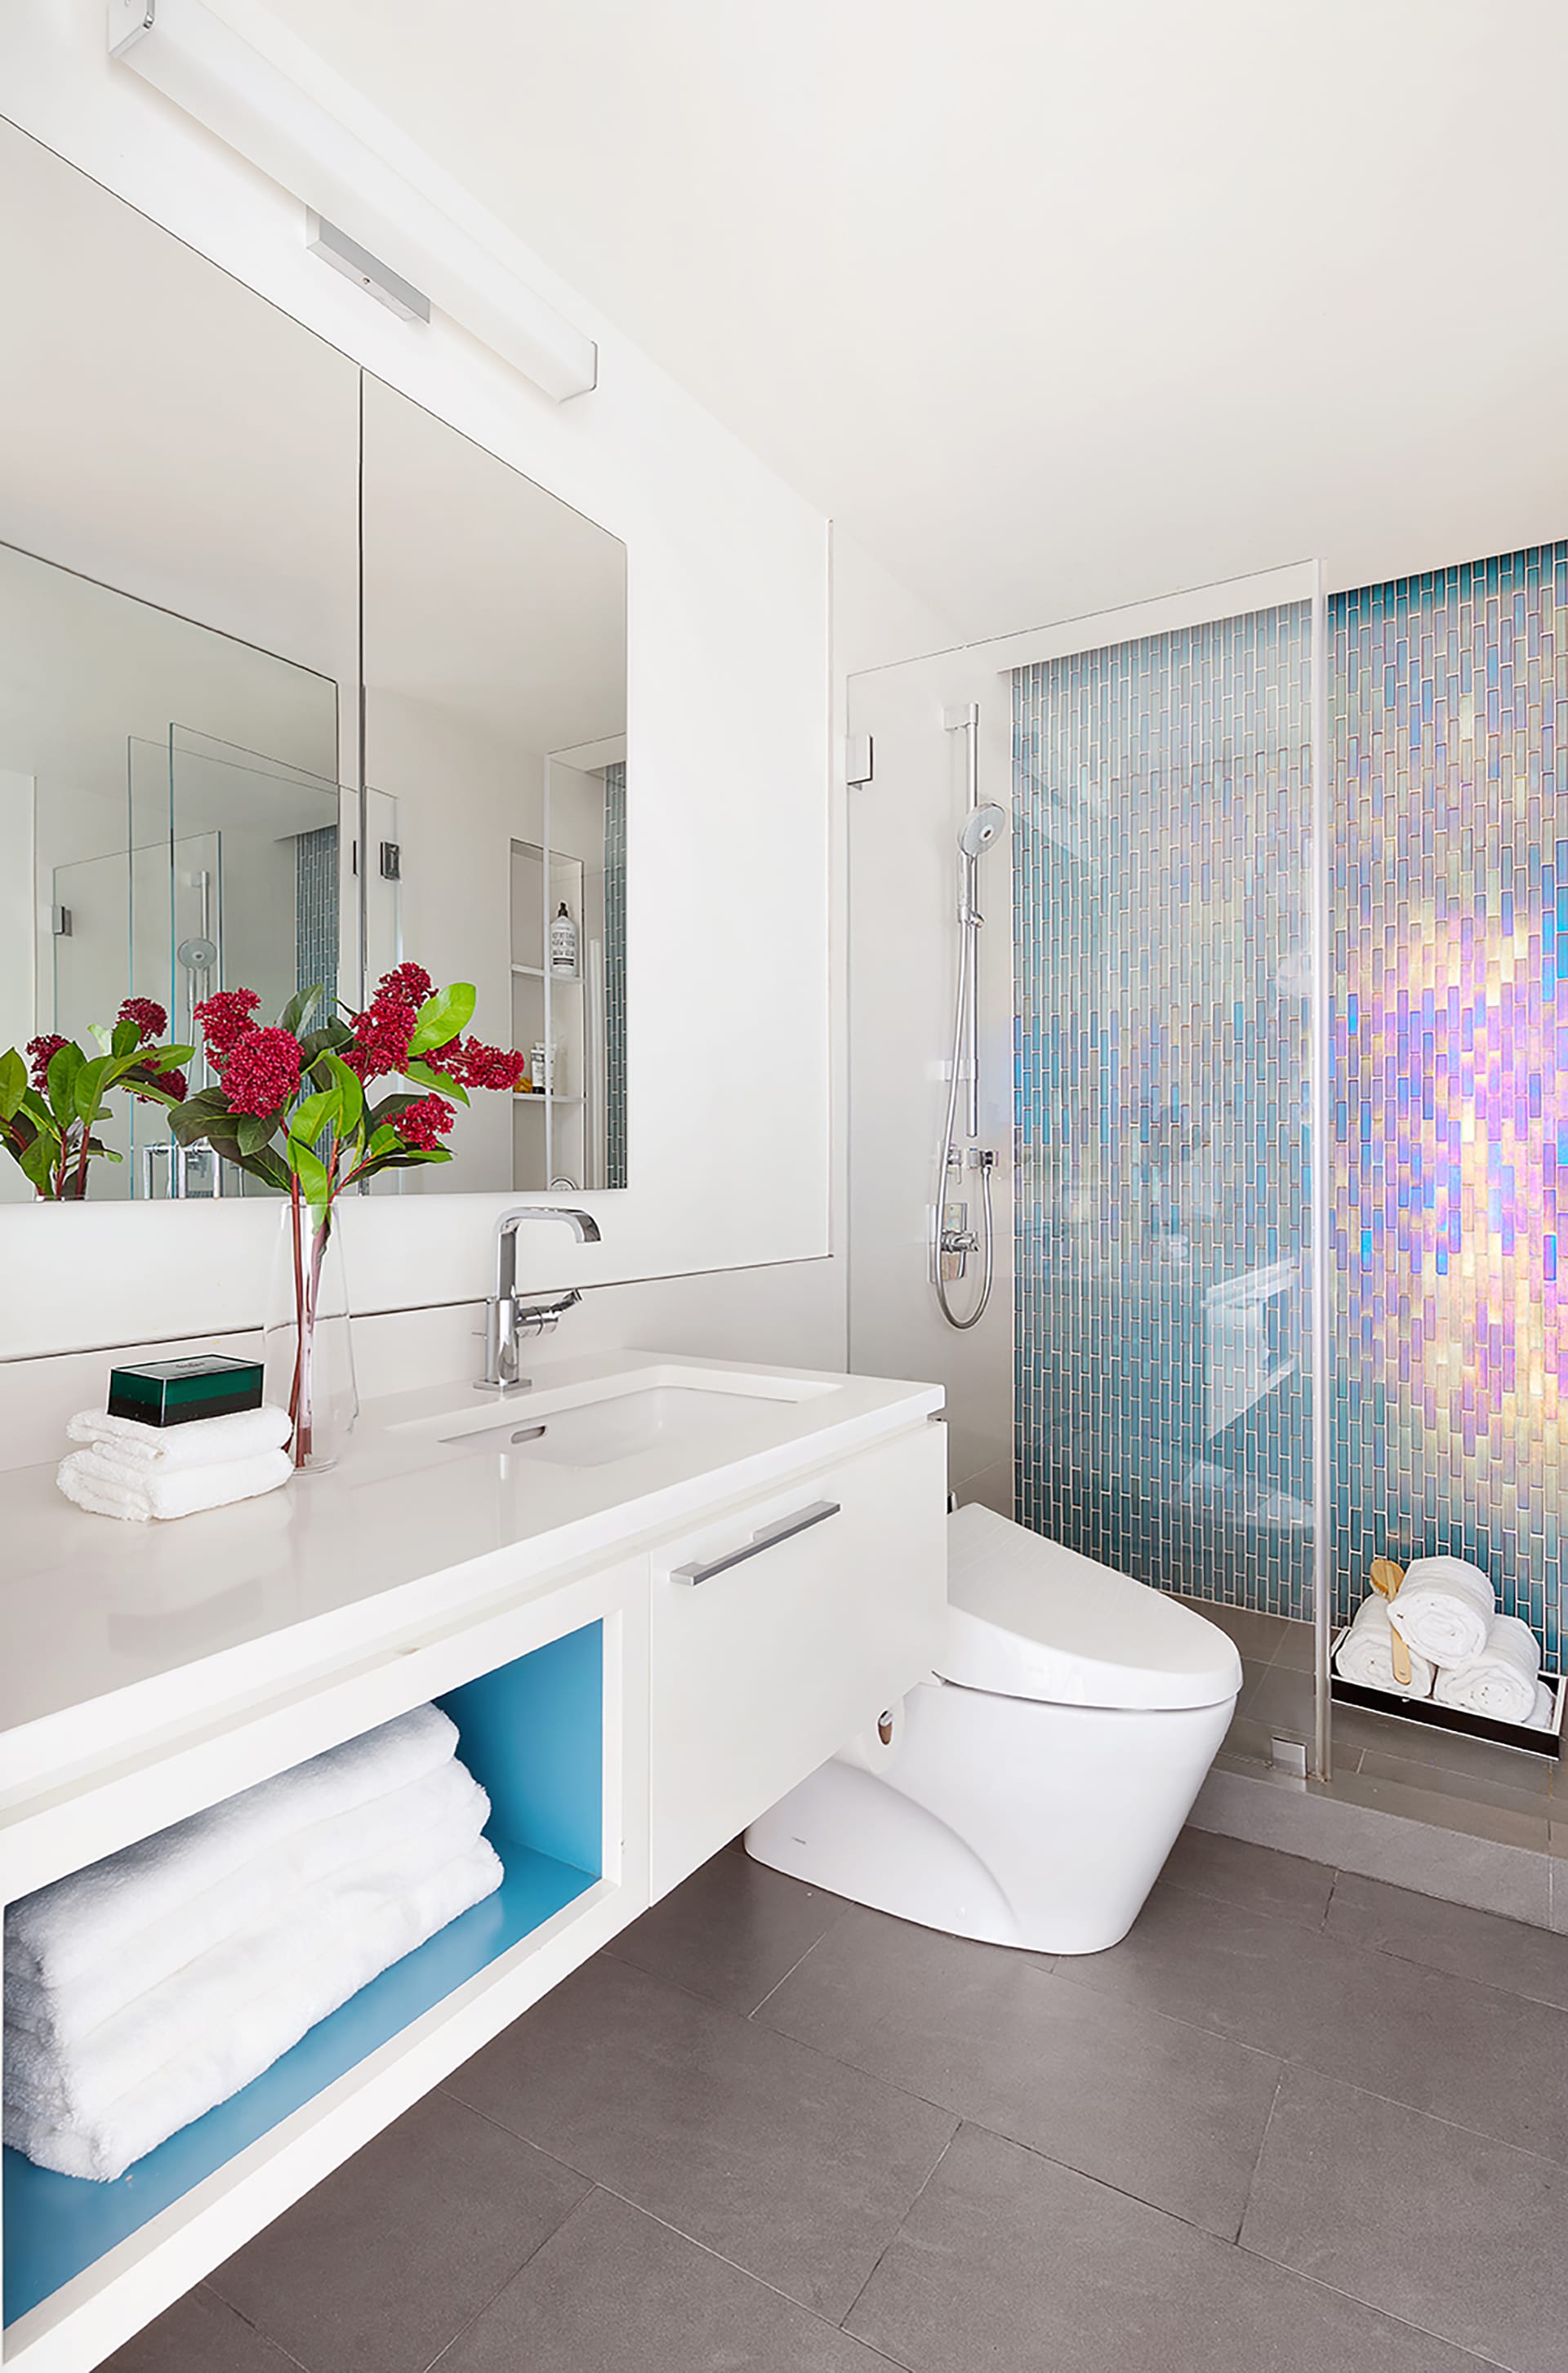 Bathroom in a carriage house with iridescent tiles in the shower